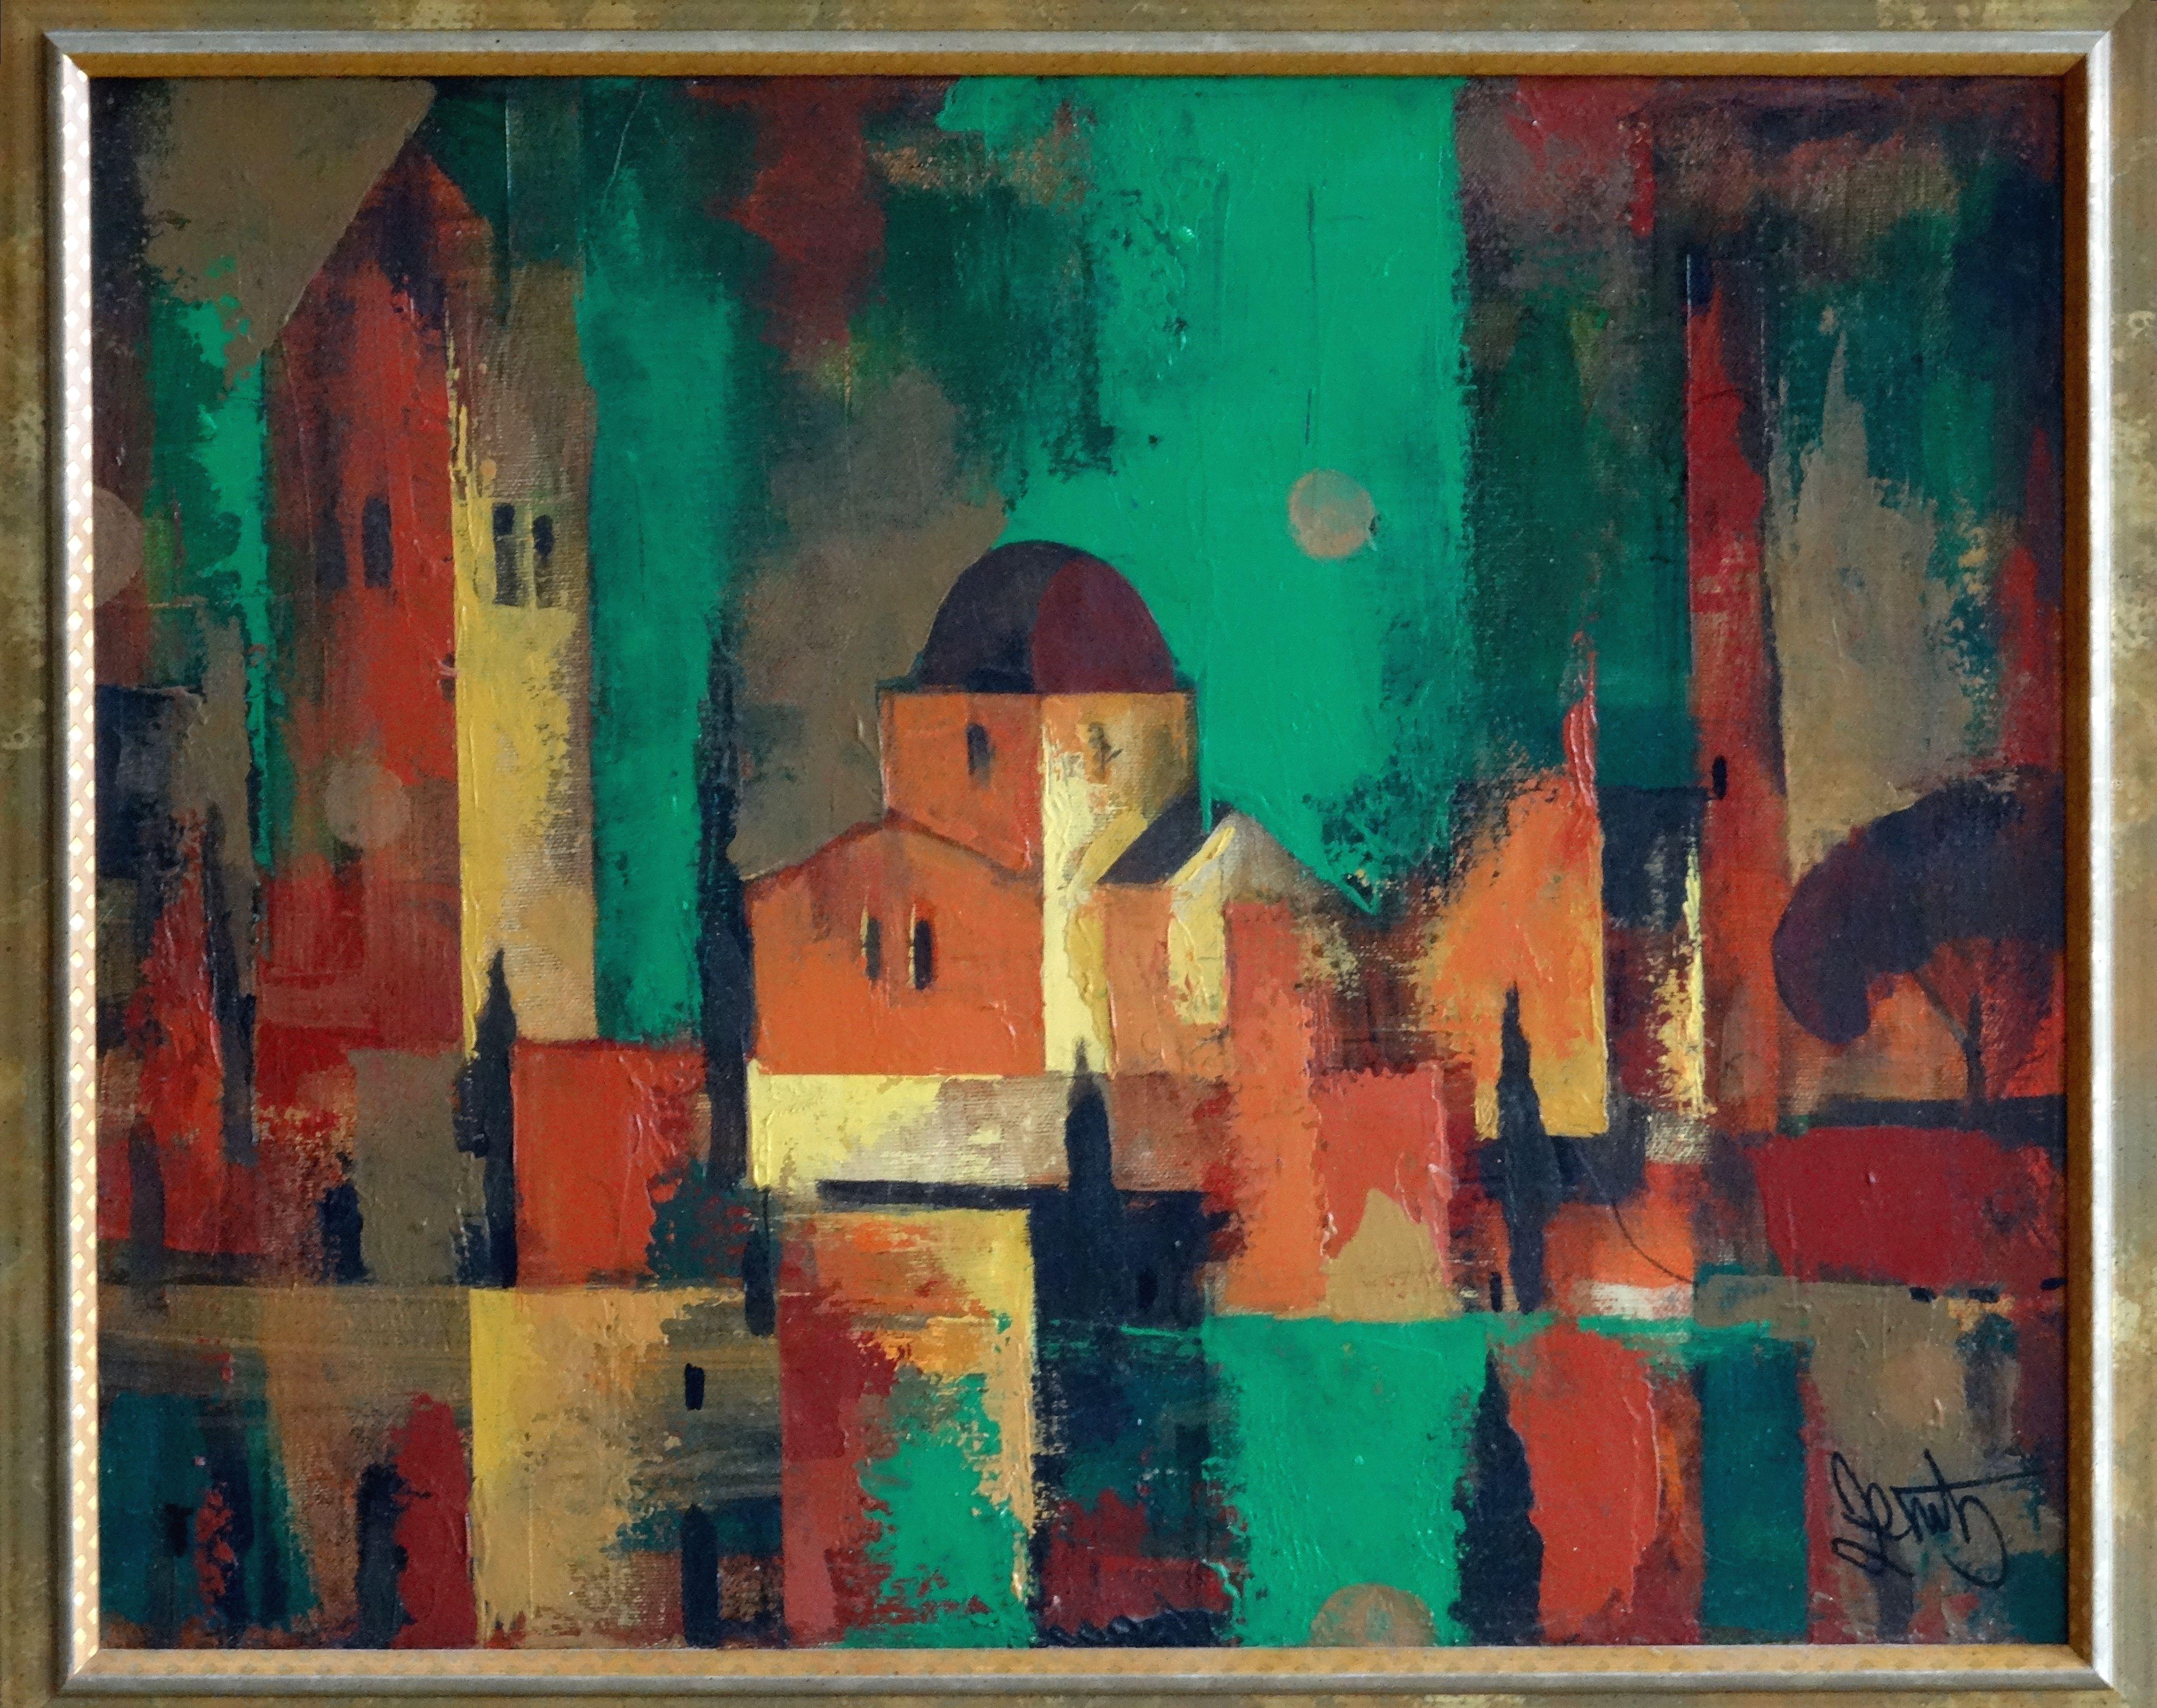 Winter in Jerusalem. 1997 oil on canvas, 40x50 cm - Painting by Janis Zemitis